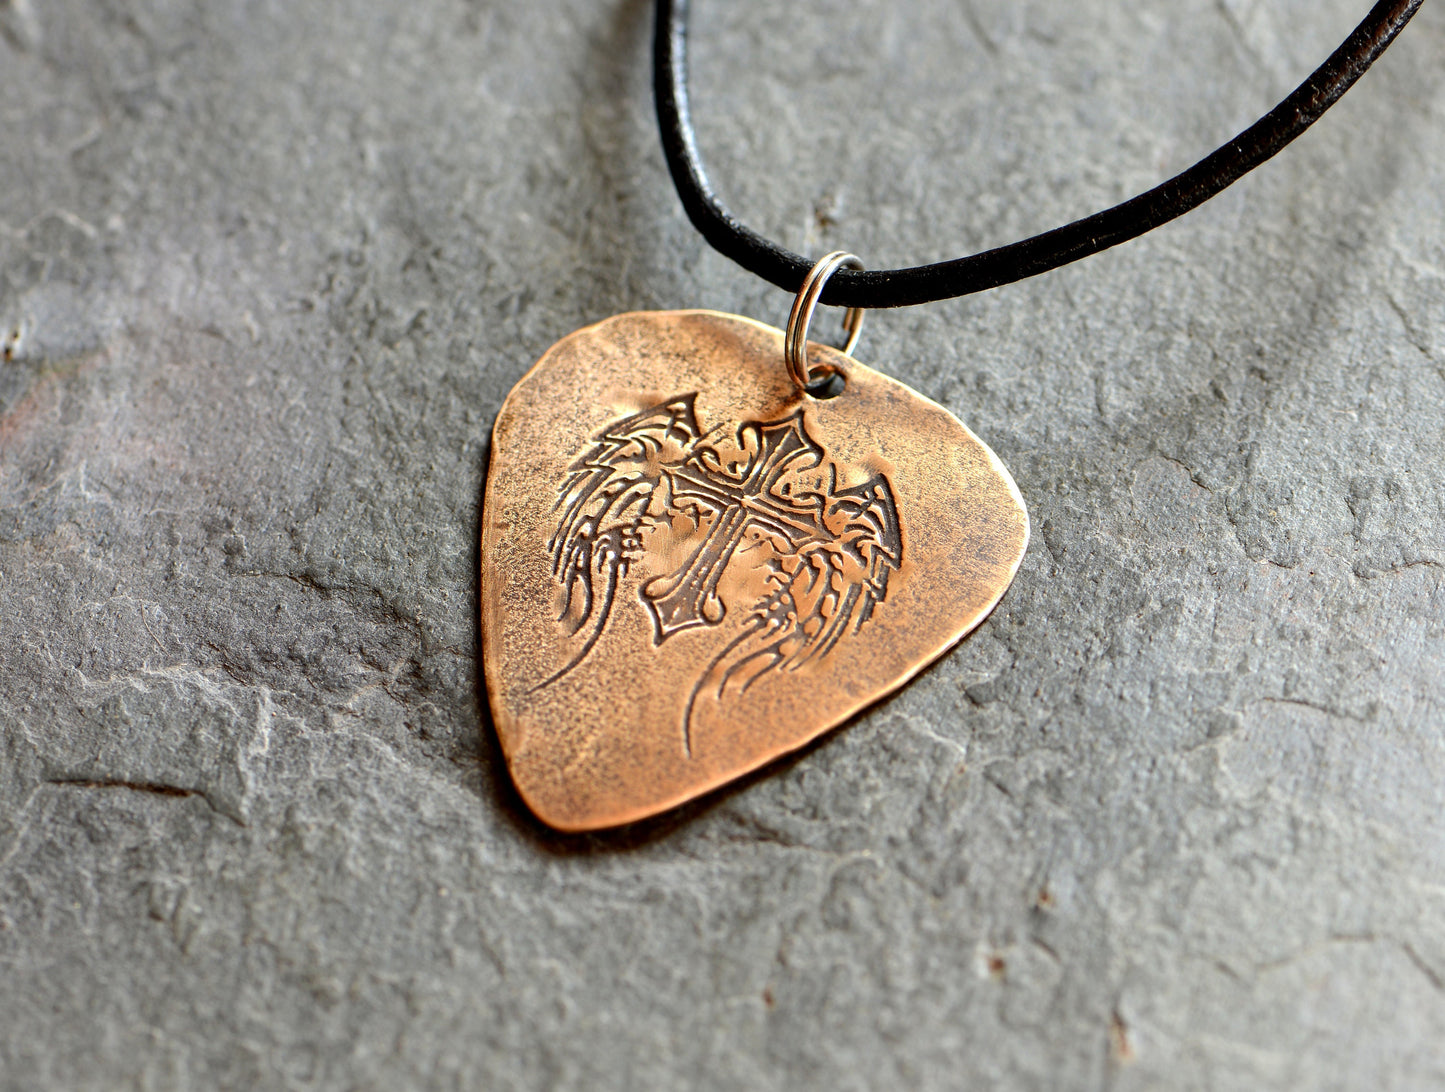 Winged cross on bronze guitar pick transformed into a necklace